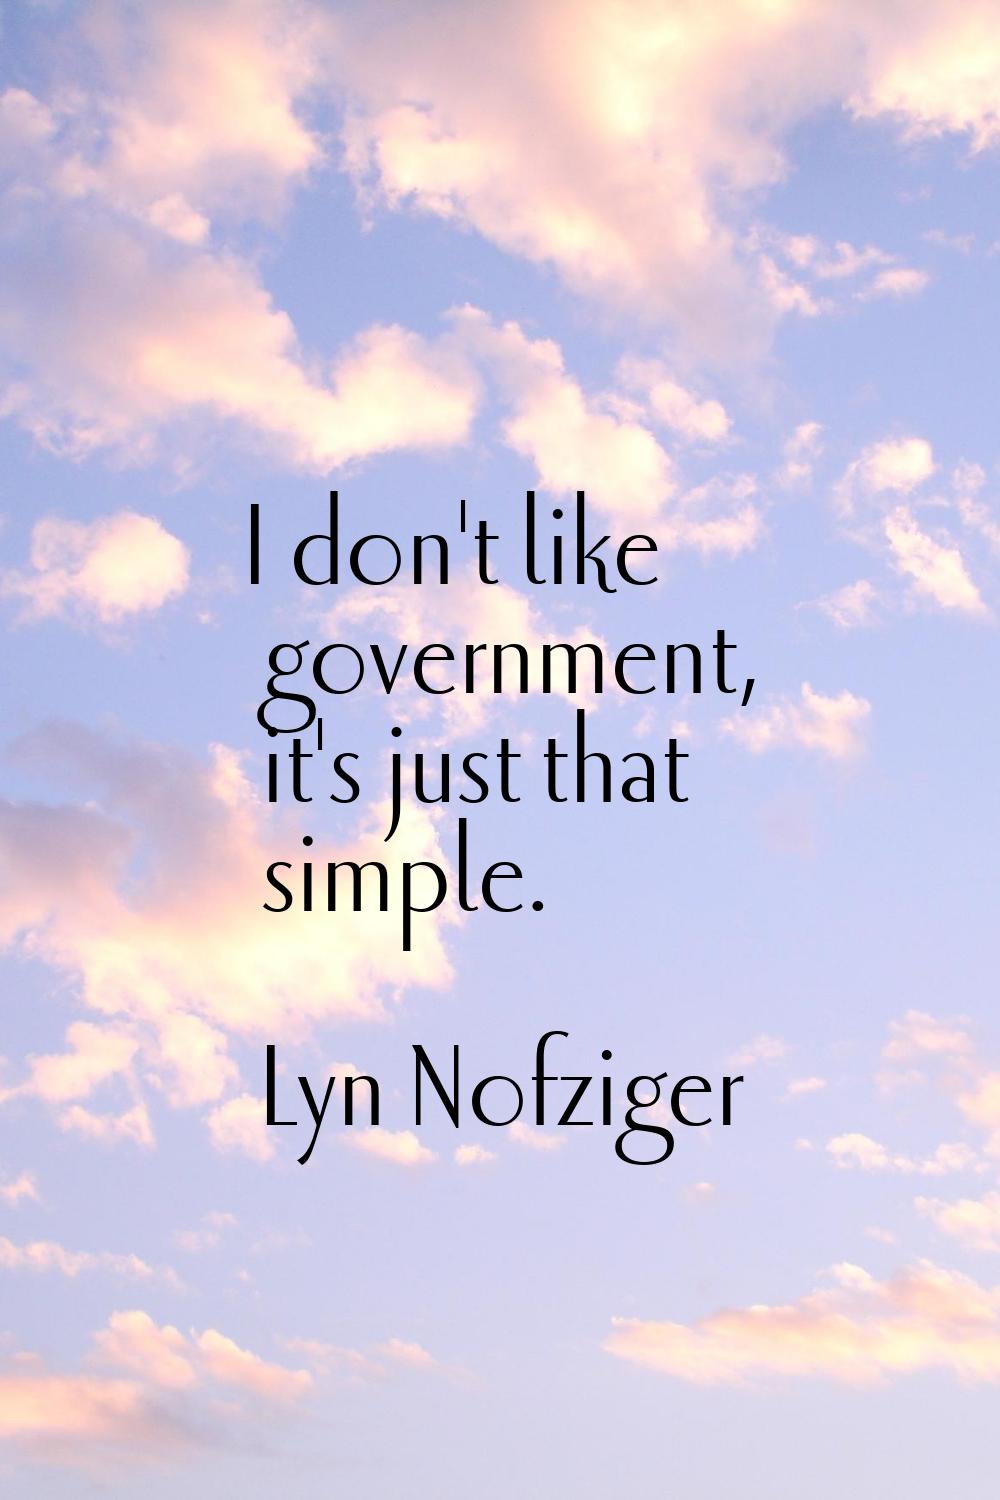 I don't like government, it's just that simple.